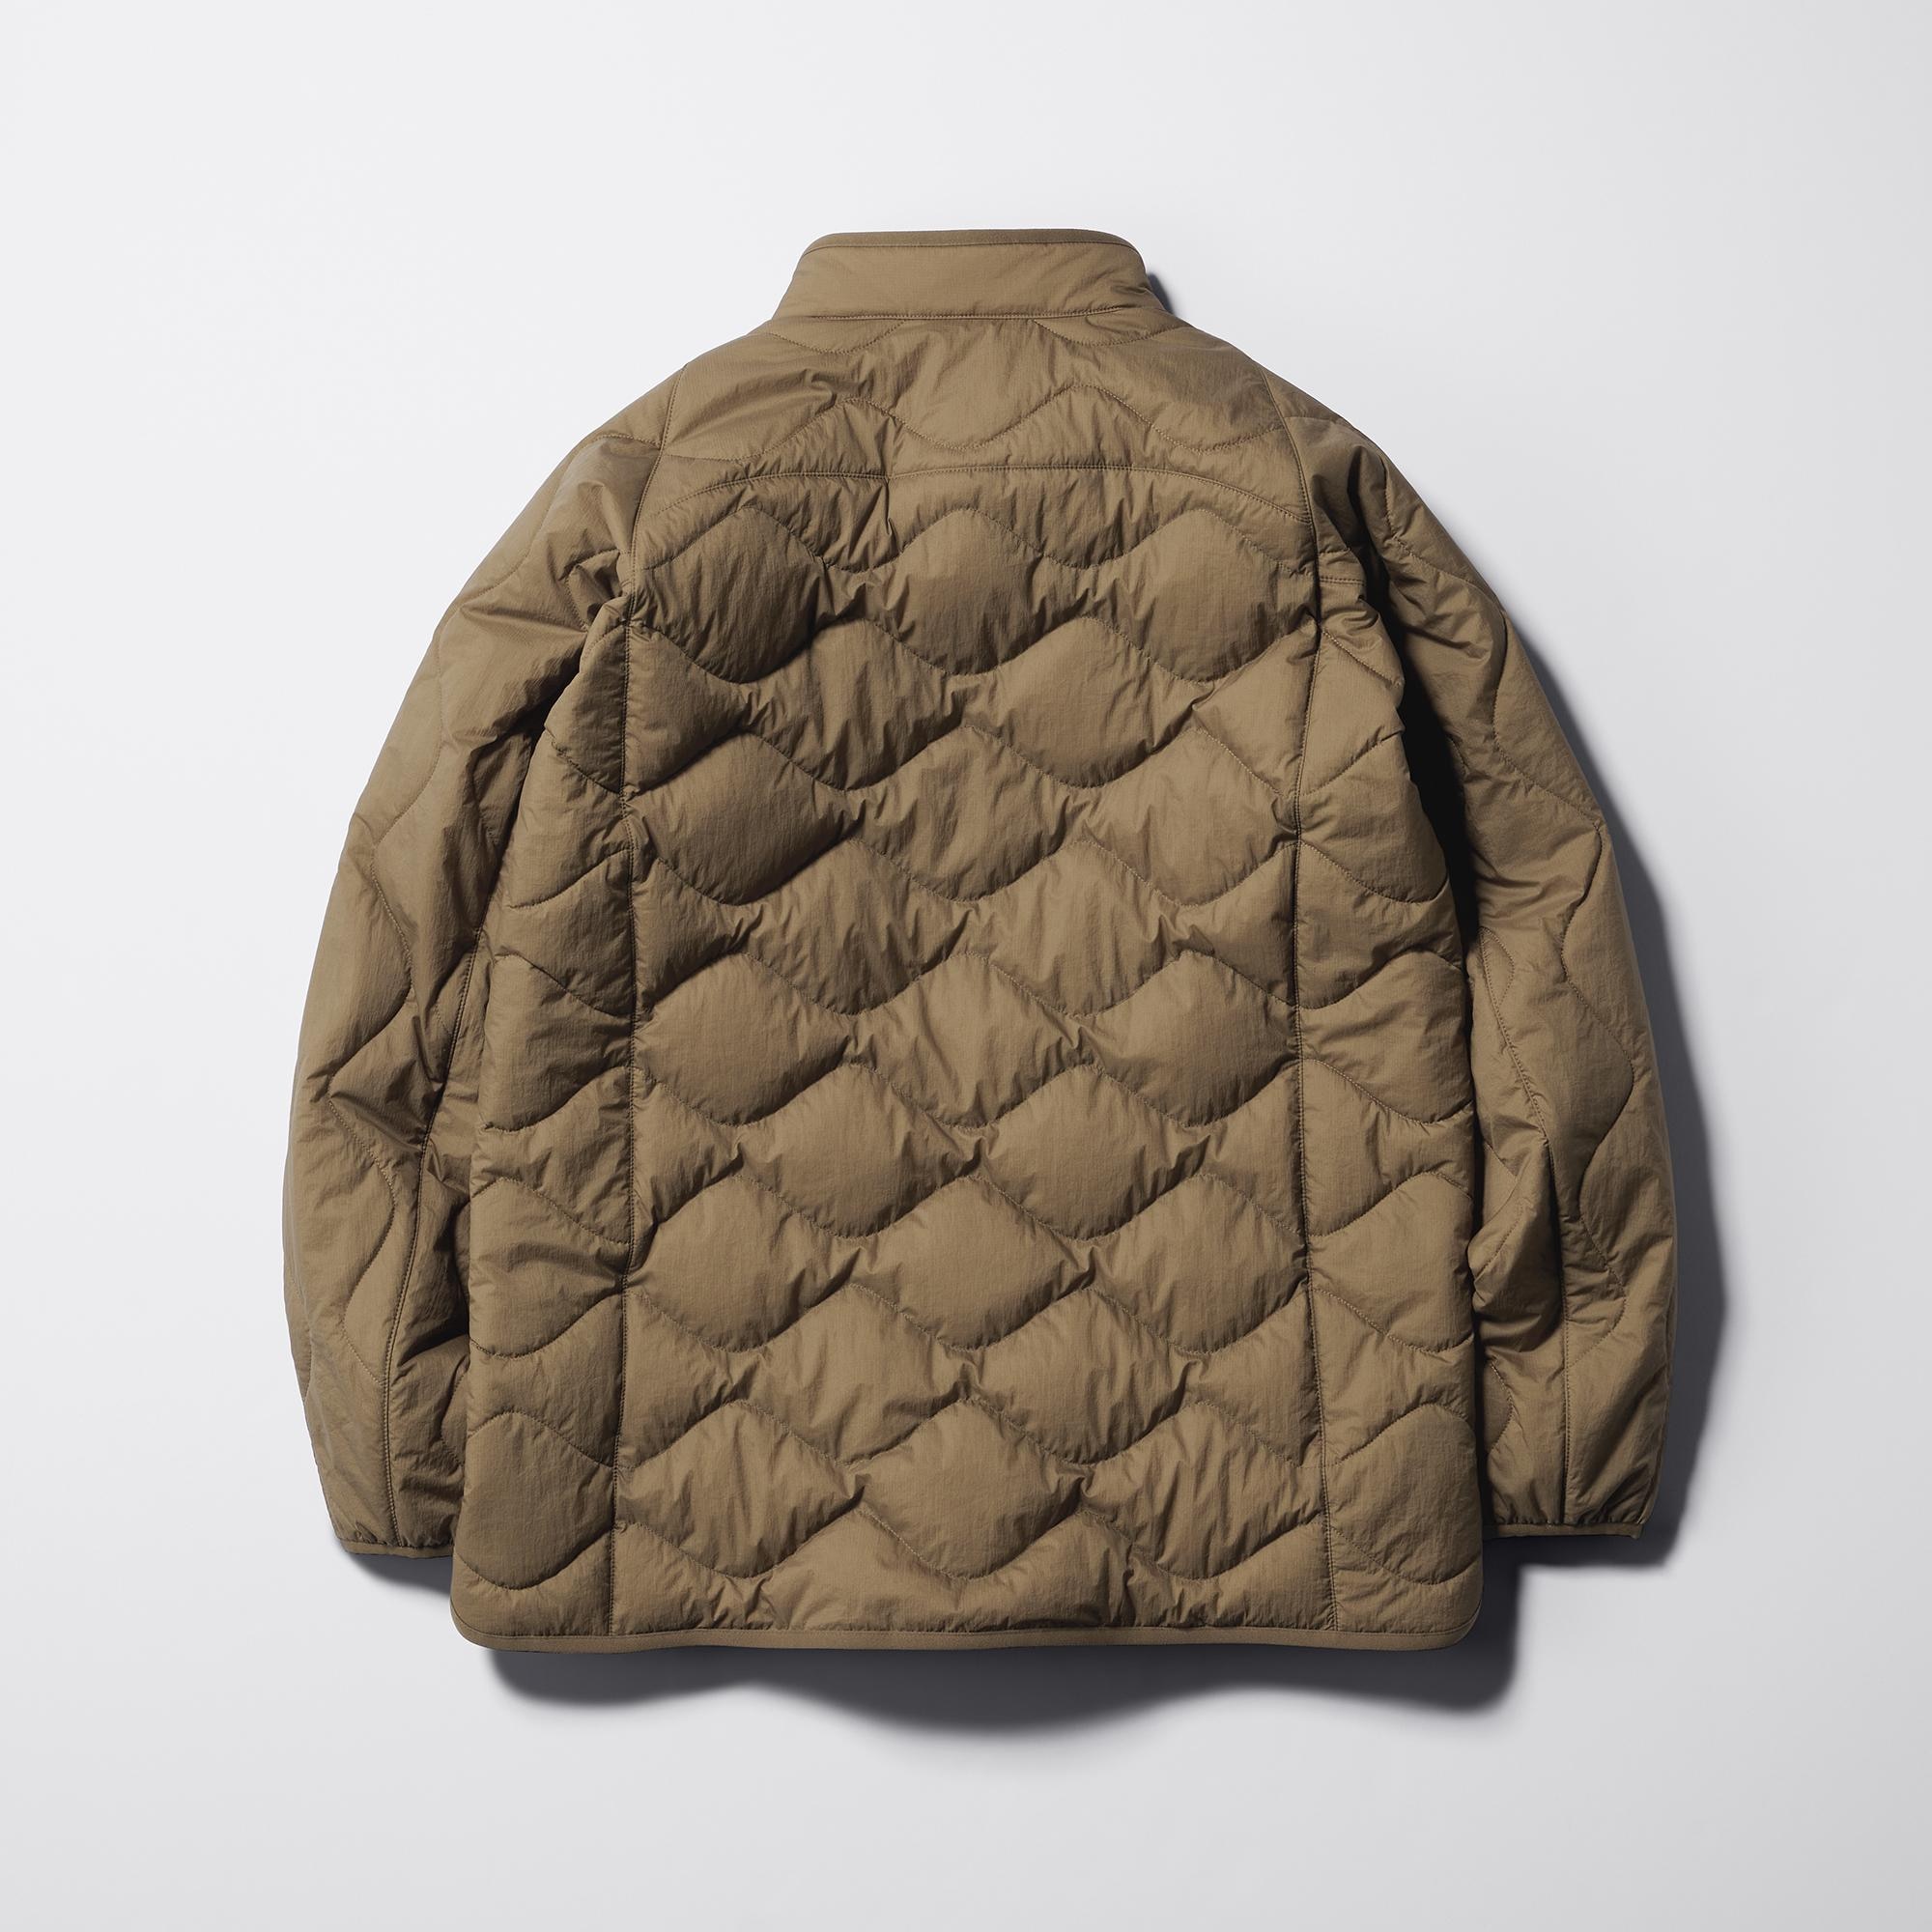 WHITE MOUNTAINEERING RECYCLED HYBRID DOWN JACKET | UNIQLO CA